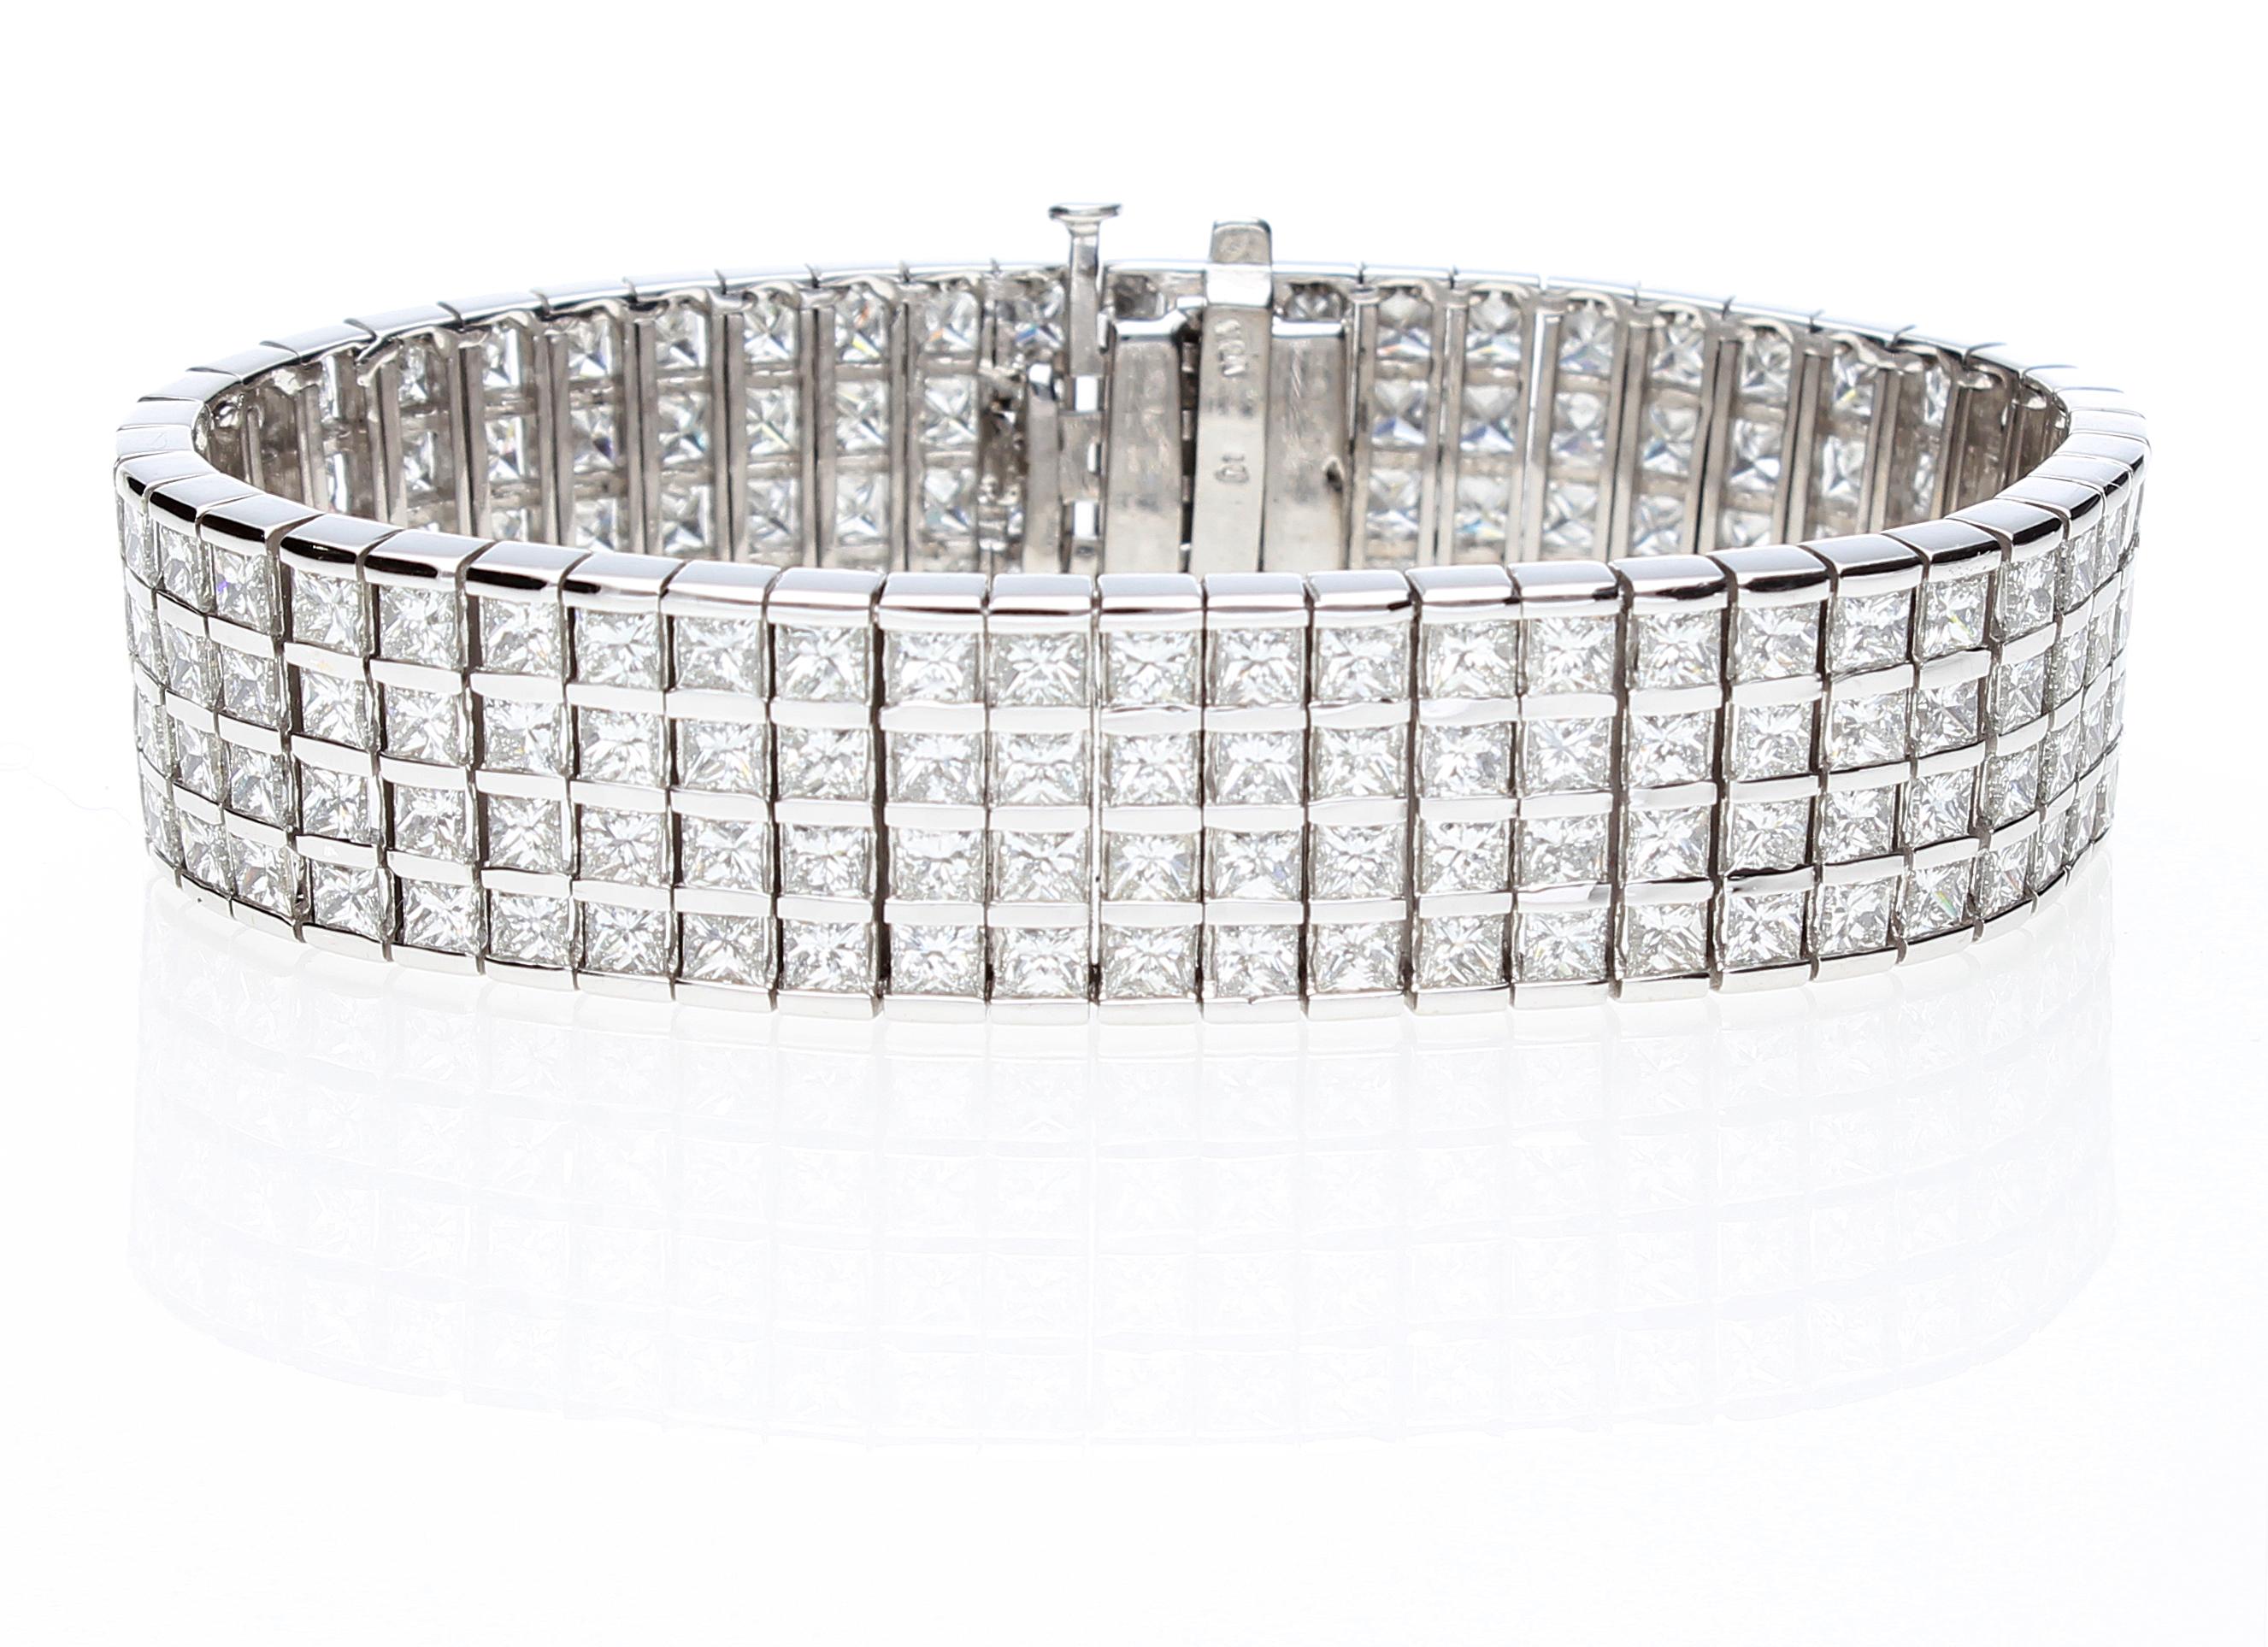 Semi-rigid bracelet with 204 princess cut diamonds total weight about 20.00 ct.
The bracelet is made up of 4 rows of princess cut diamonds, each diamond is set between two white gold rails. 
The bracelet has a retractable closure and also an